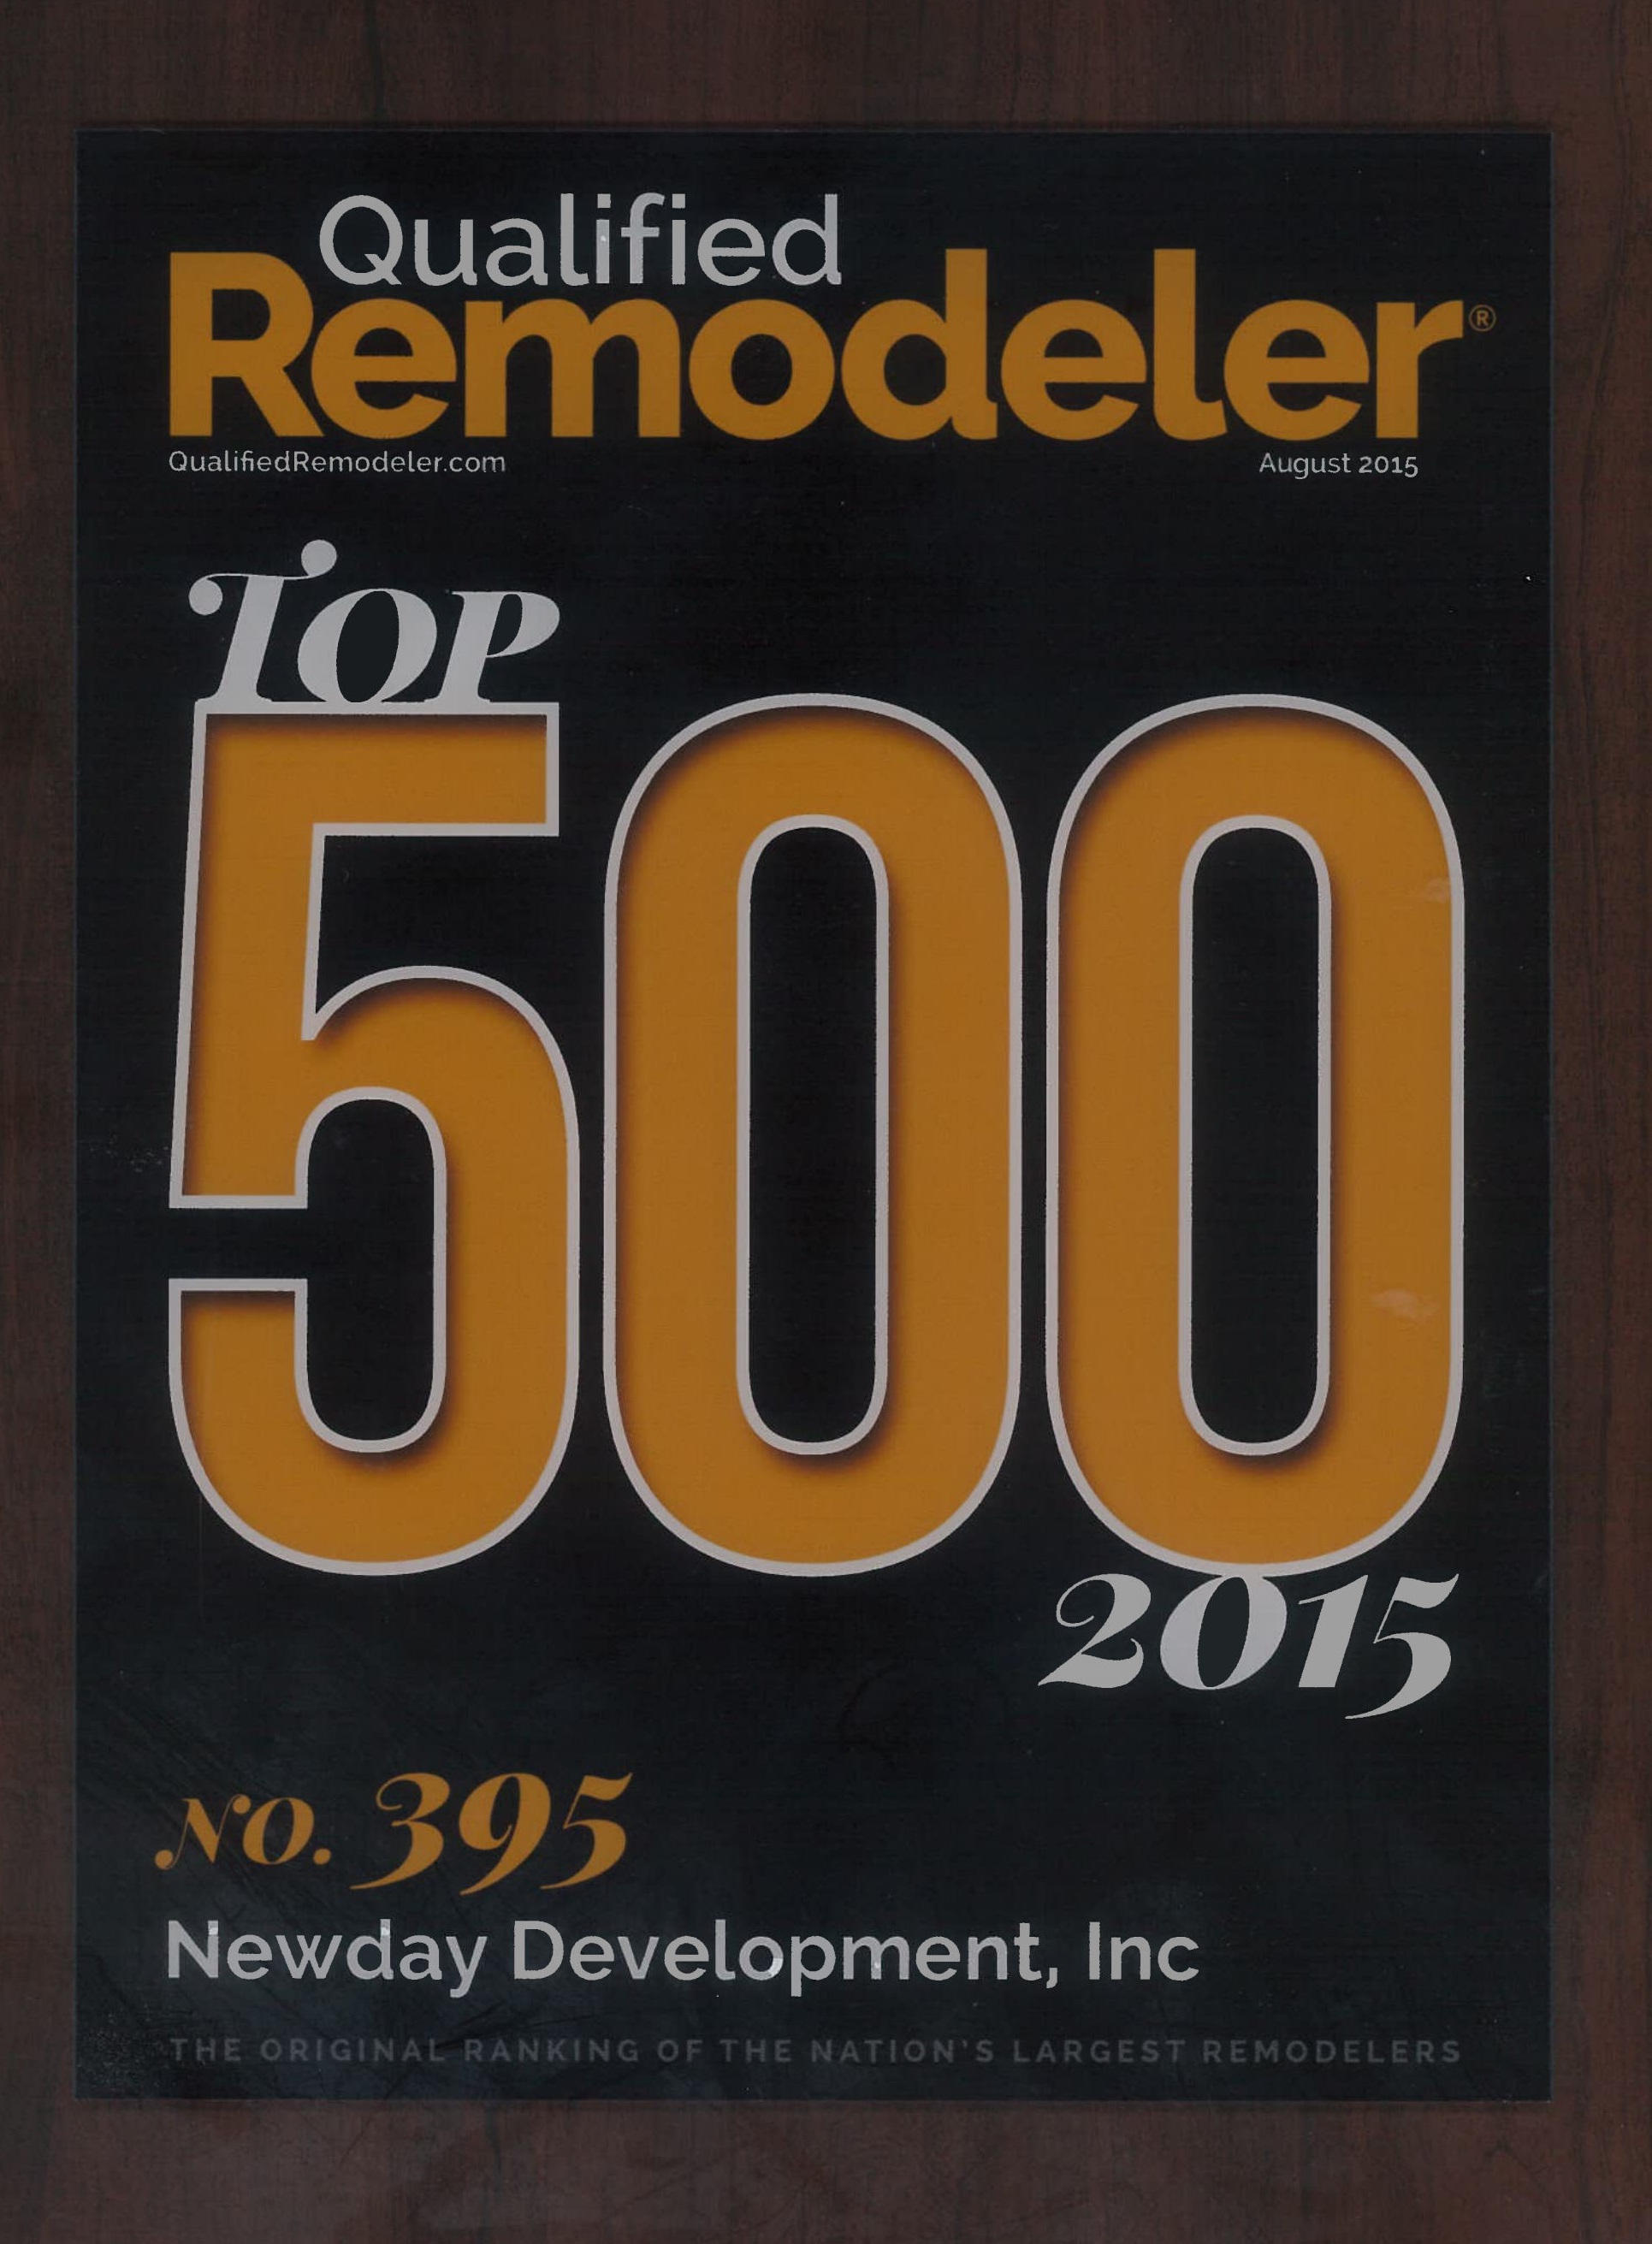 Qualified Remodeler Top 500 firms –